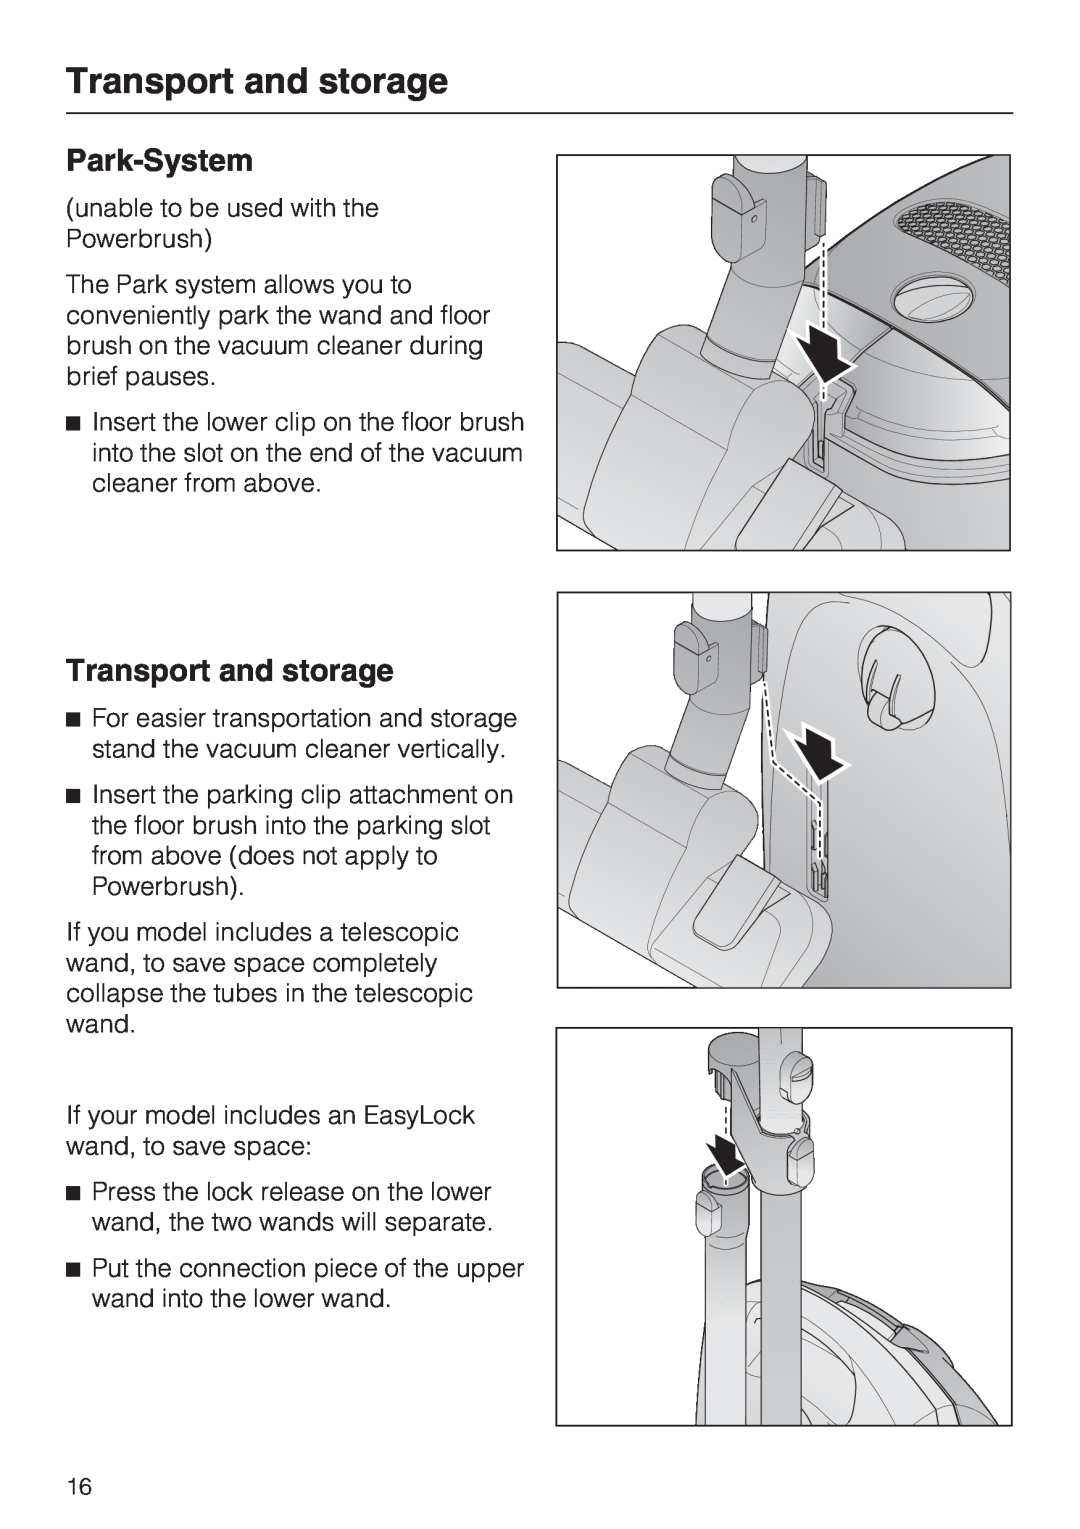 Miele S 2000 operating instructions Transport and storage, Park-System 